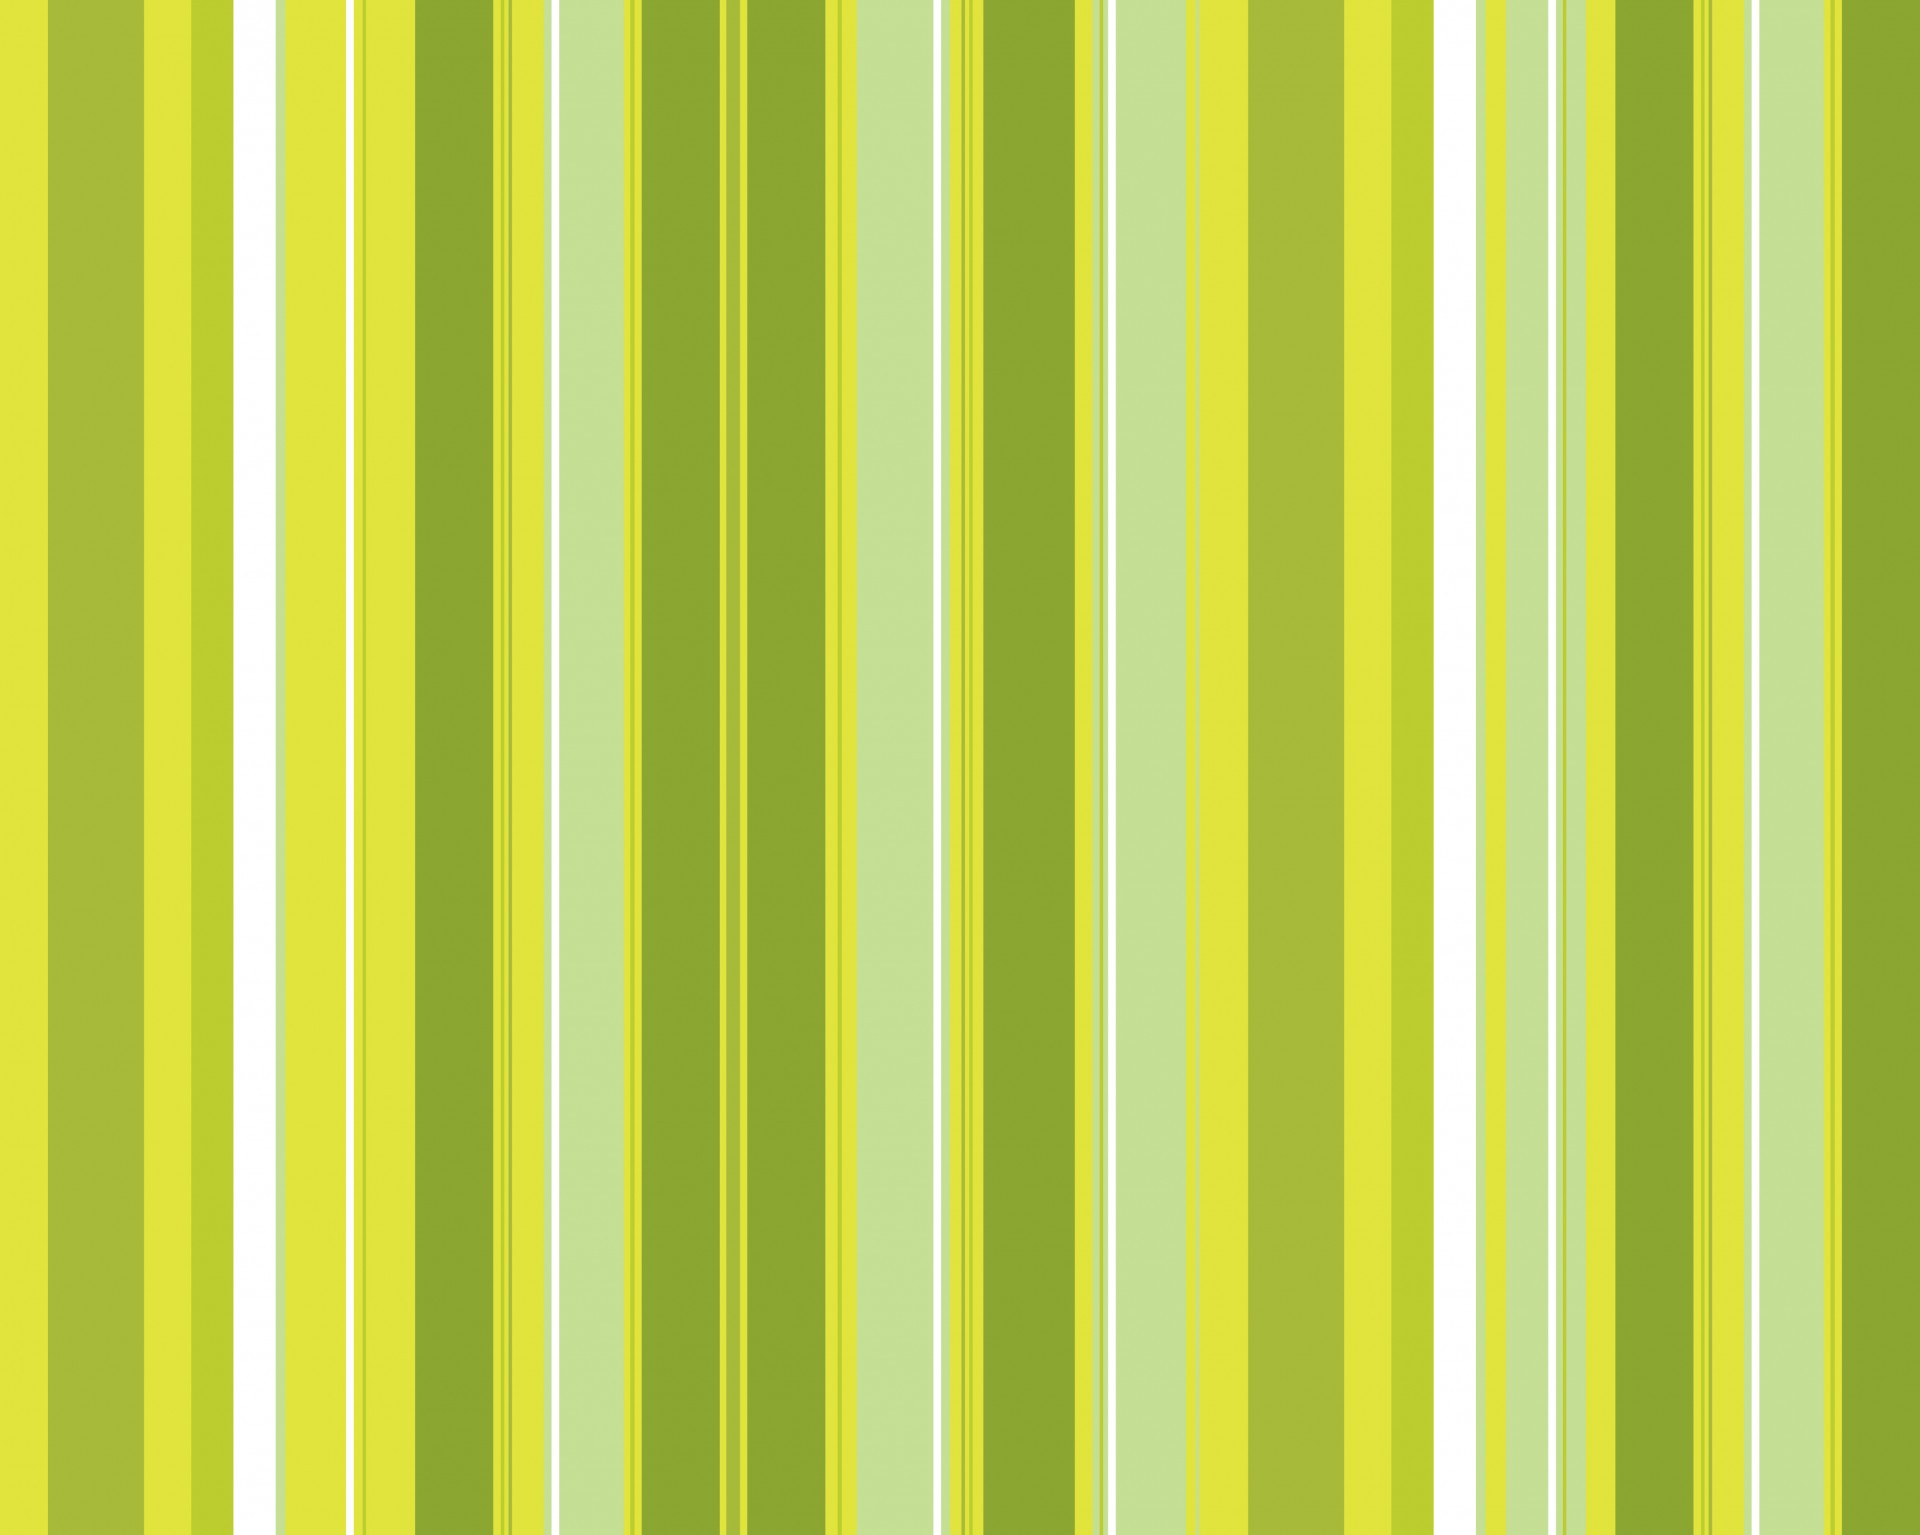 Stripes Colorful Background Pattern